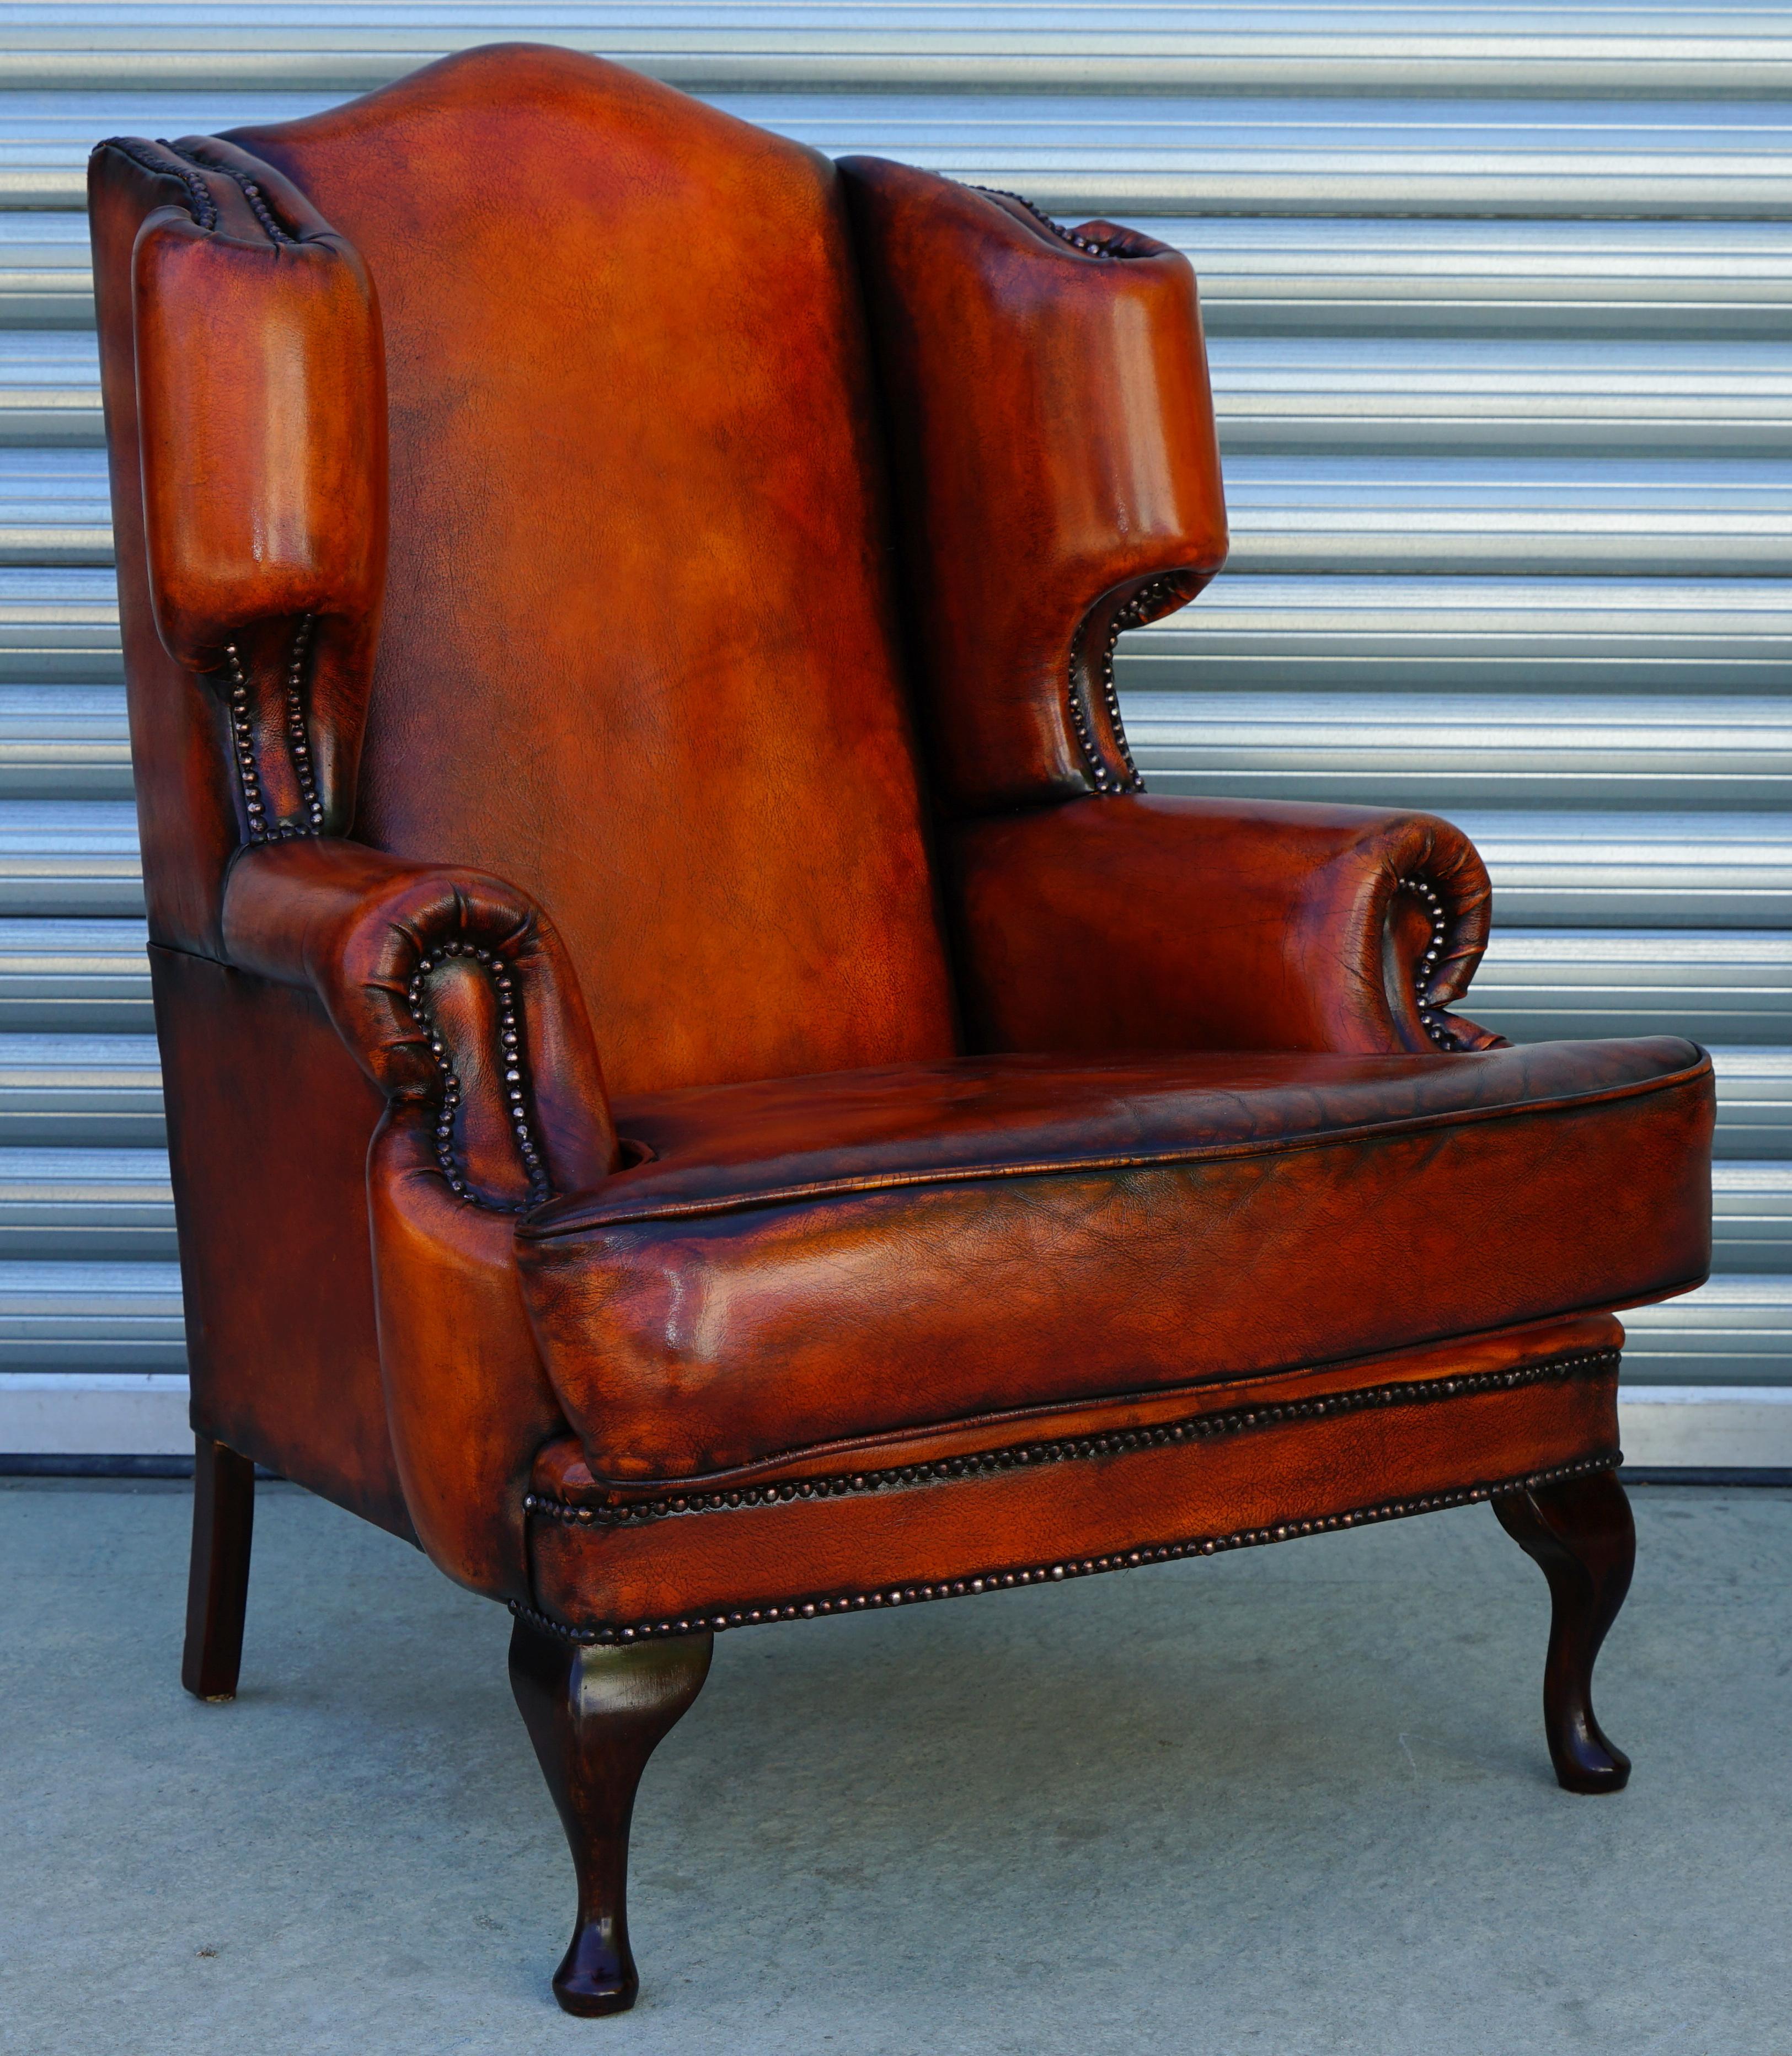 We are delighted to offer for sale this stunning pair of lovely fully restored vintage William Morris style wingback armchairs in whisky brown leather 

These chairs are a real tour de force, they have absolutely everything going for them, the